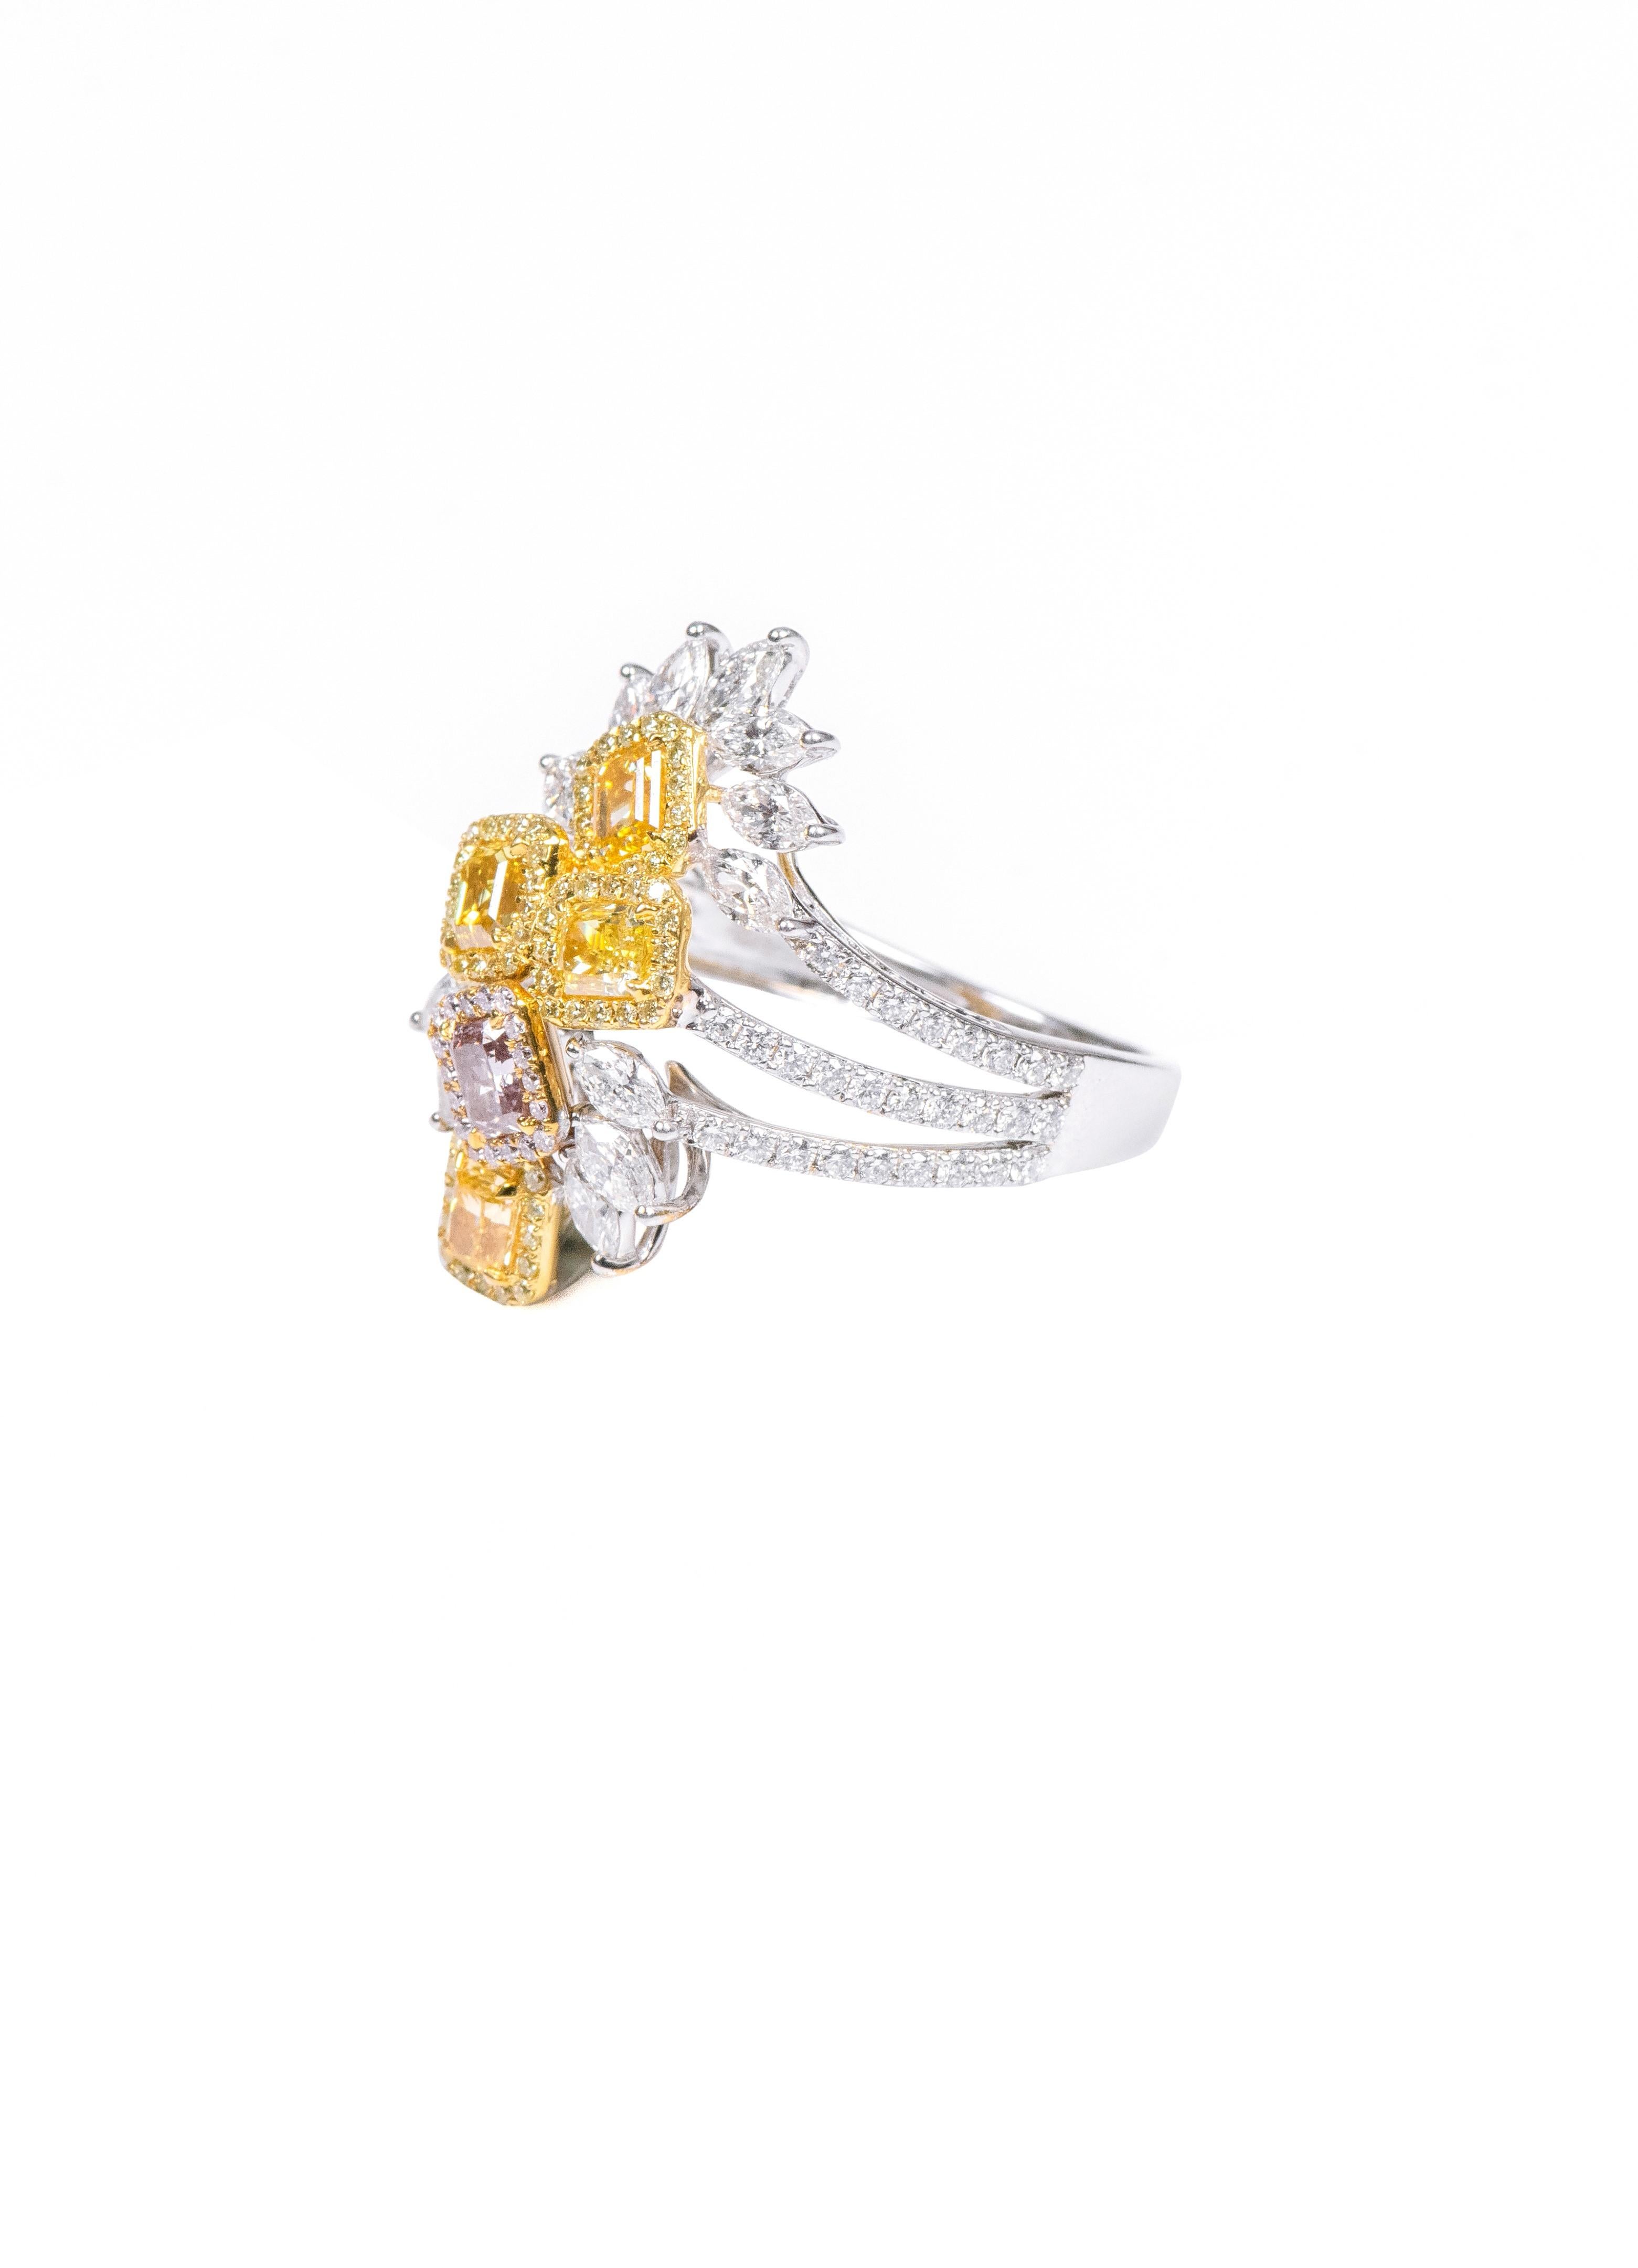 Step into a world of timeless elegance with our 18 Karat Gold 2.88 Carat Fancy Yellow Diamond and Diamond Cocktail Ring. Each piece is a unique testament to unparalleled craftsmanship, meticulously curated to capture the essence of sophistication